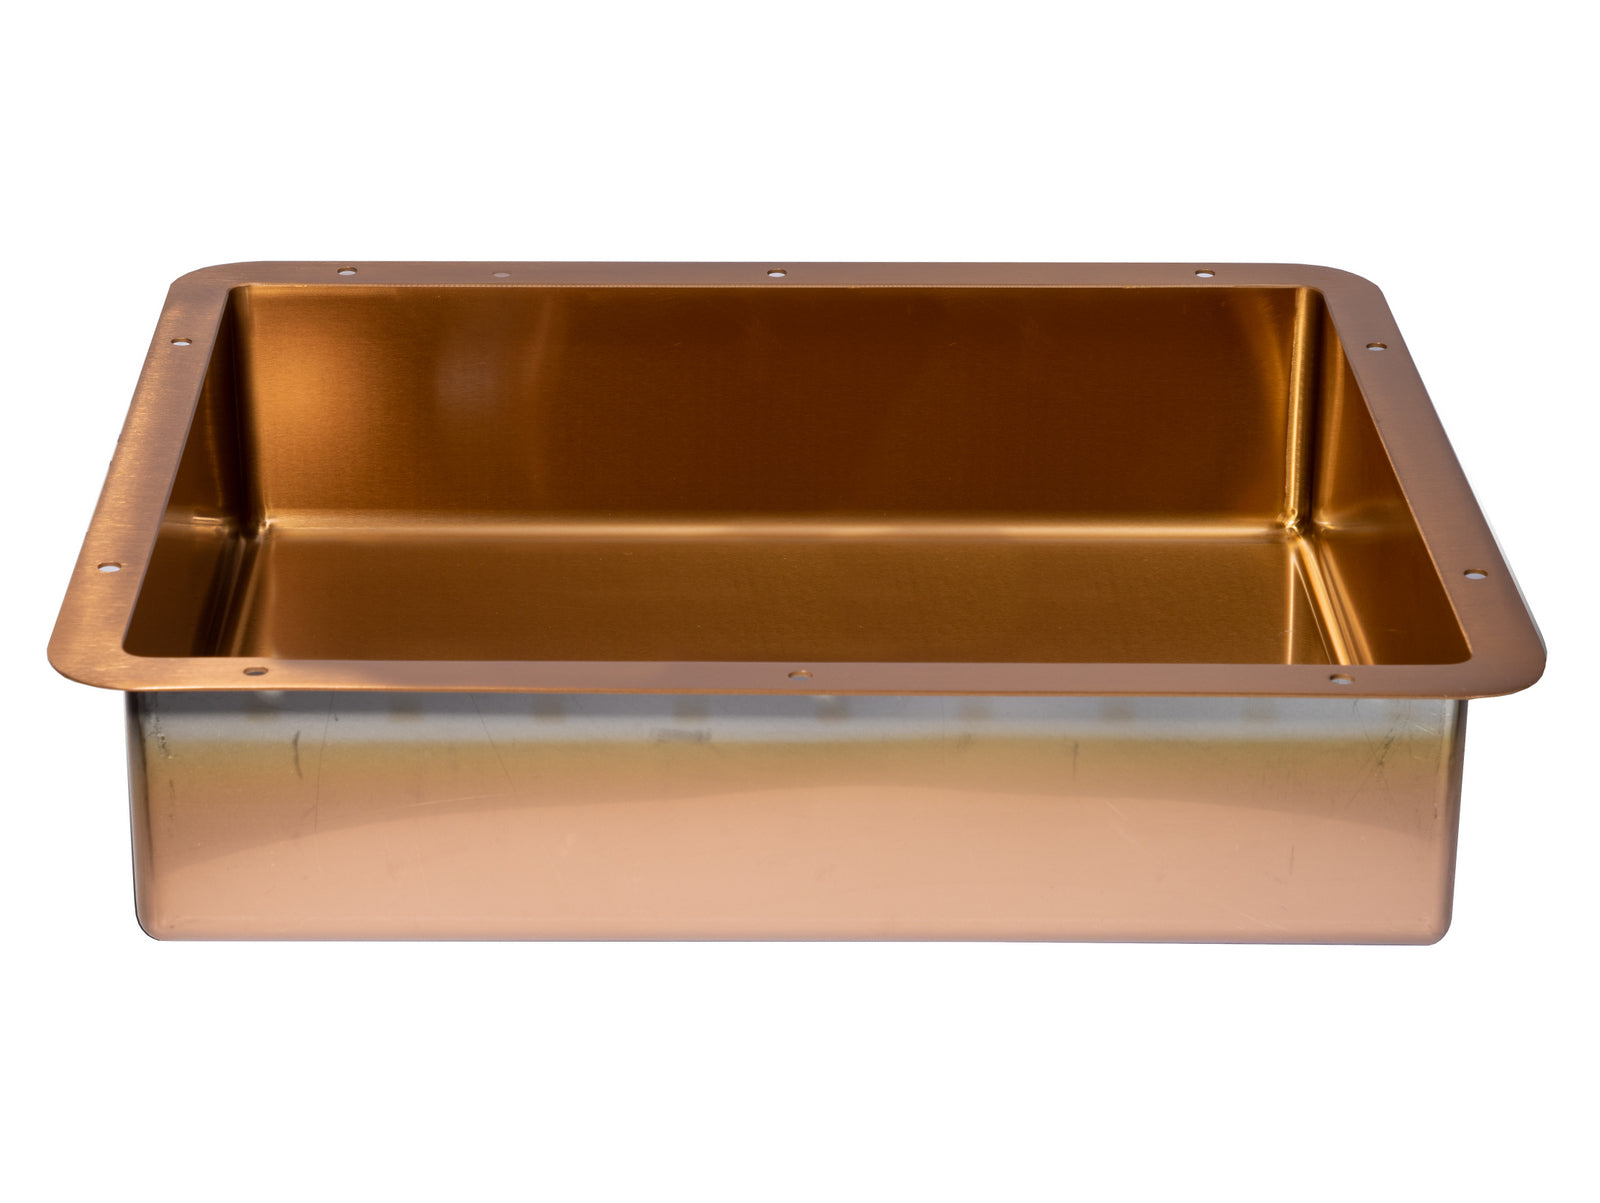 Rectangular 20" x 16" Stainless Steel Undermount Bathroom Sink with Drain in Rose Gold